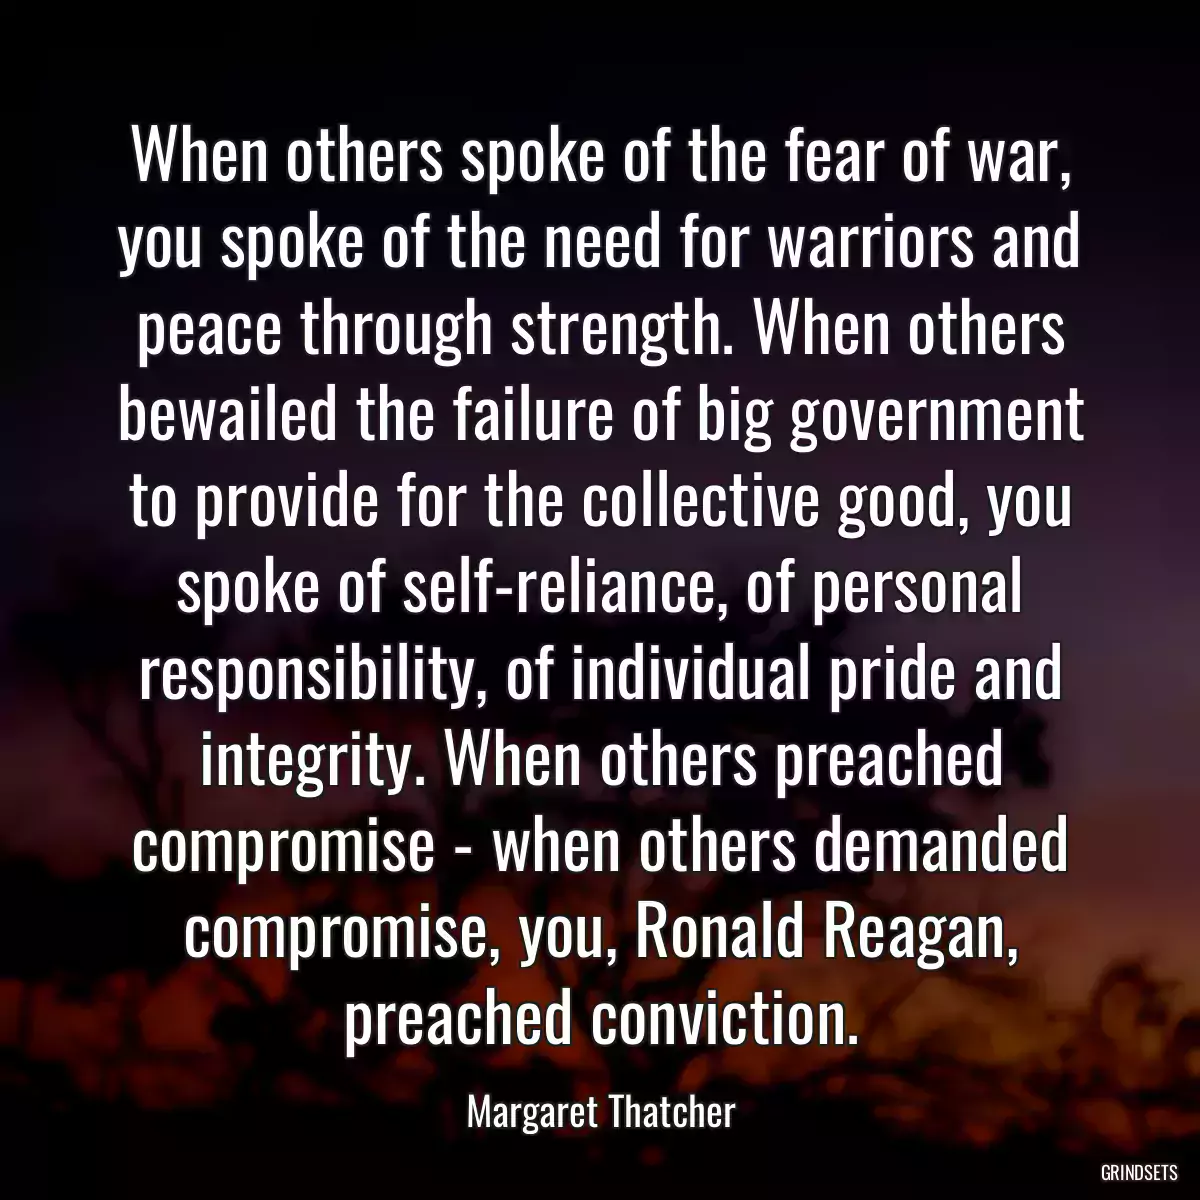 When others spoke of the fear of war, you spoke of the need for warriors and peace through strength. When others bewailed the failure of big government to provide for the collective good, you spoke of self-reliance, of personal responsibility, of individual pride and integrity. When others preached compromise - when others demanded compromise, you, Ronald Reagan, preached conviction.